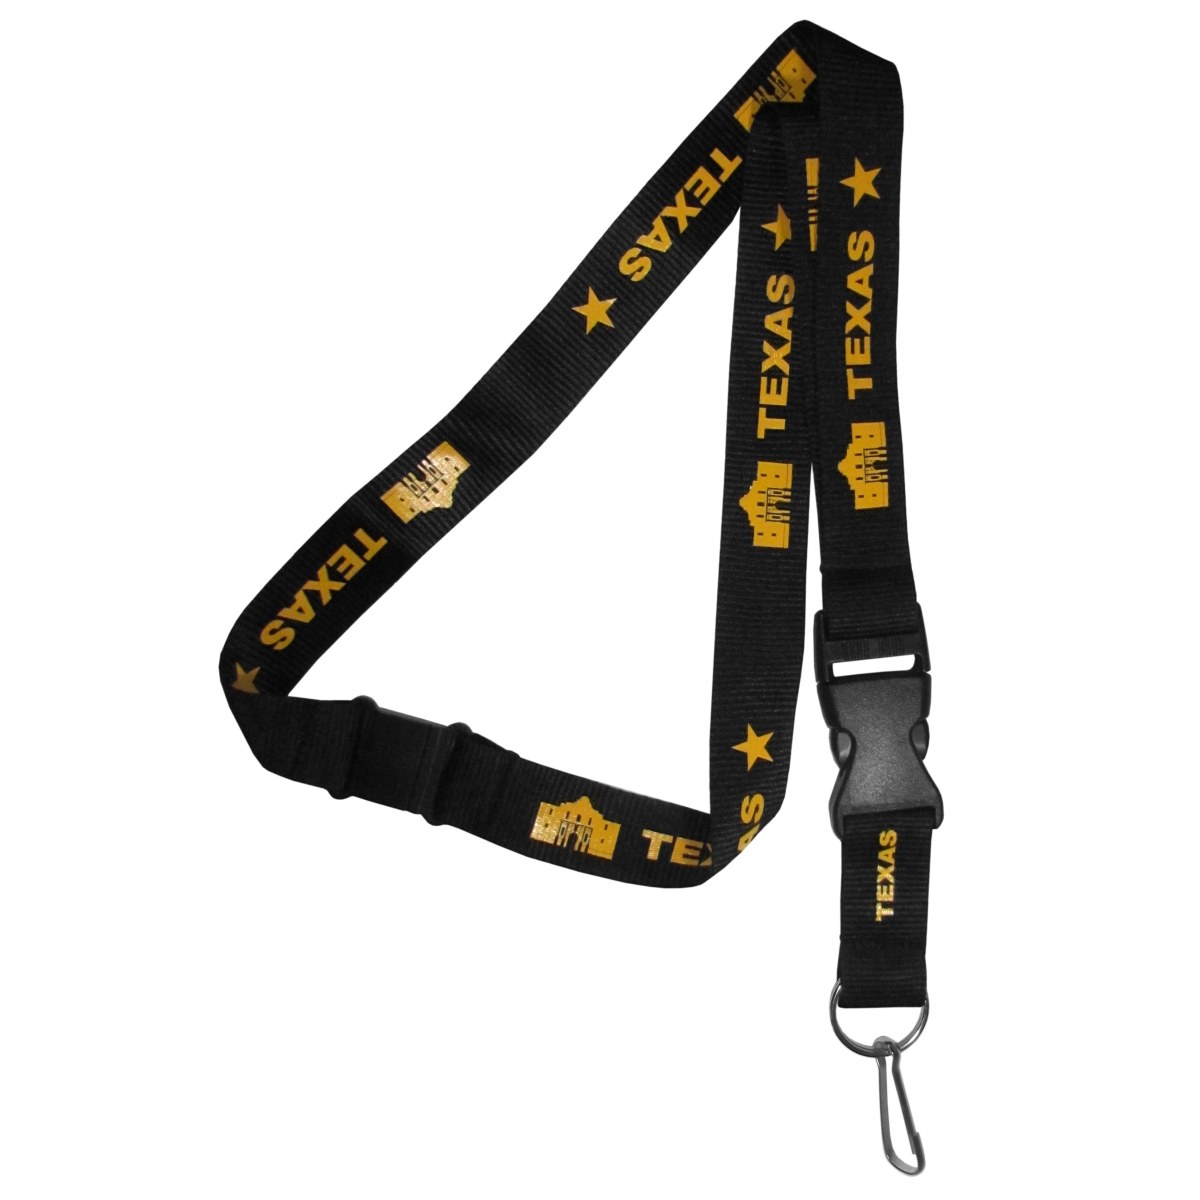 Picture of Siskiyou SLY128 21 in. Unisex Geography Texas Alamo Lanyard